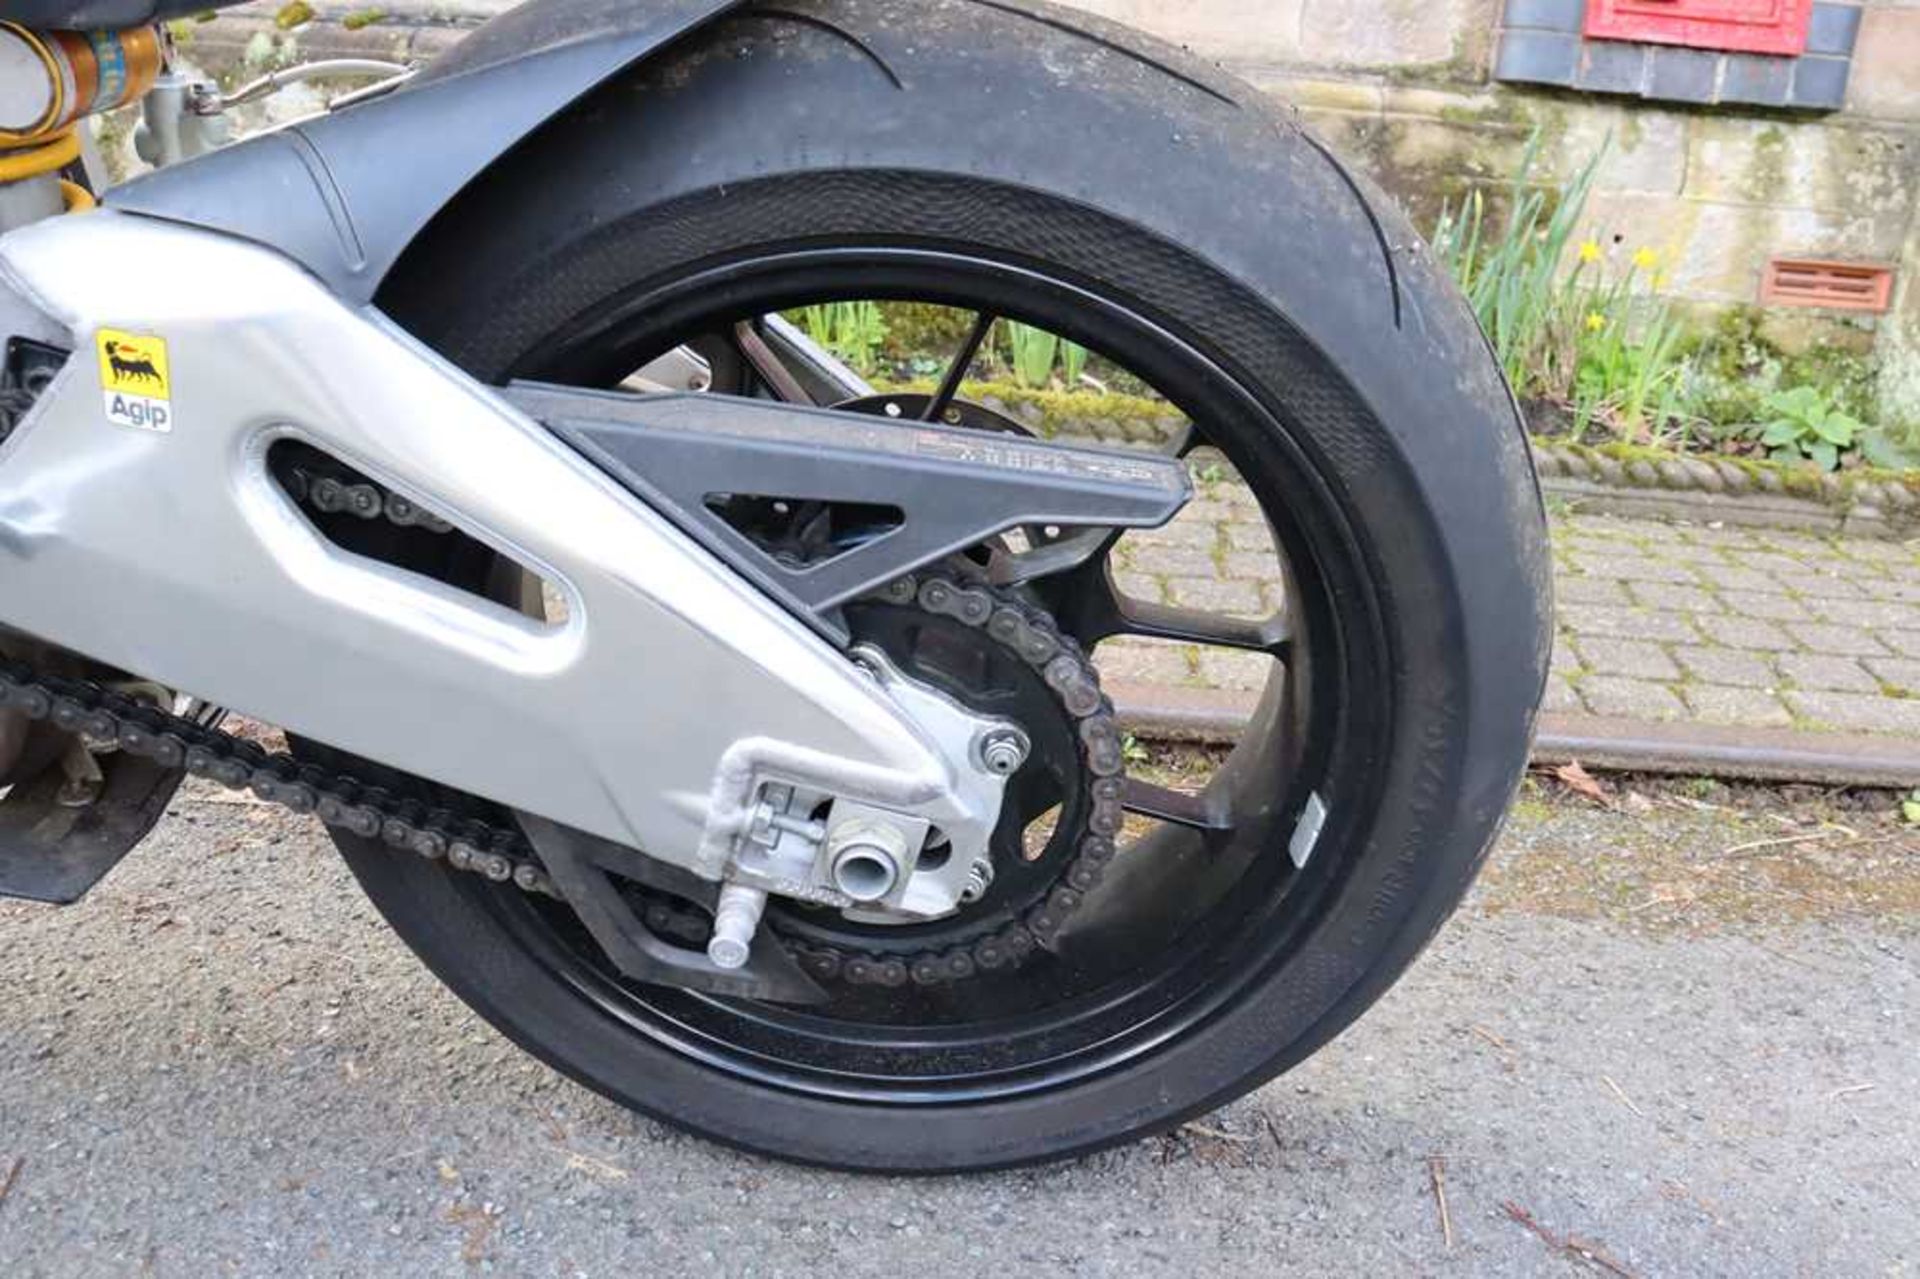 2010 Aprilia RSV4R Fitted with Moto GP style exhaust, original included - Image 28 of 44